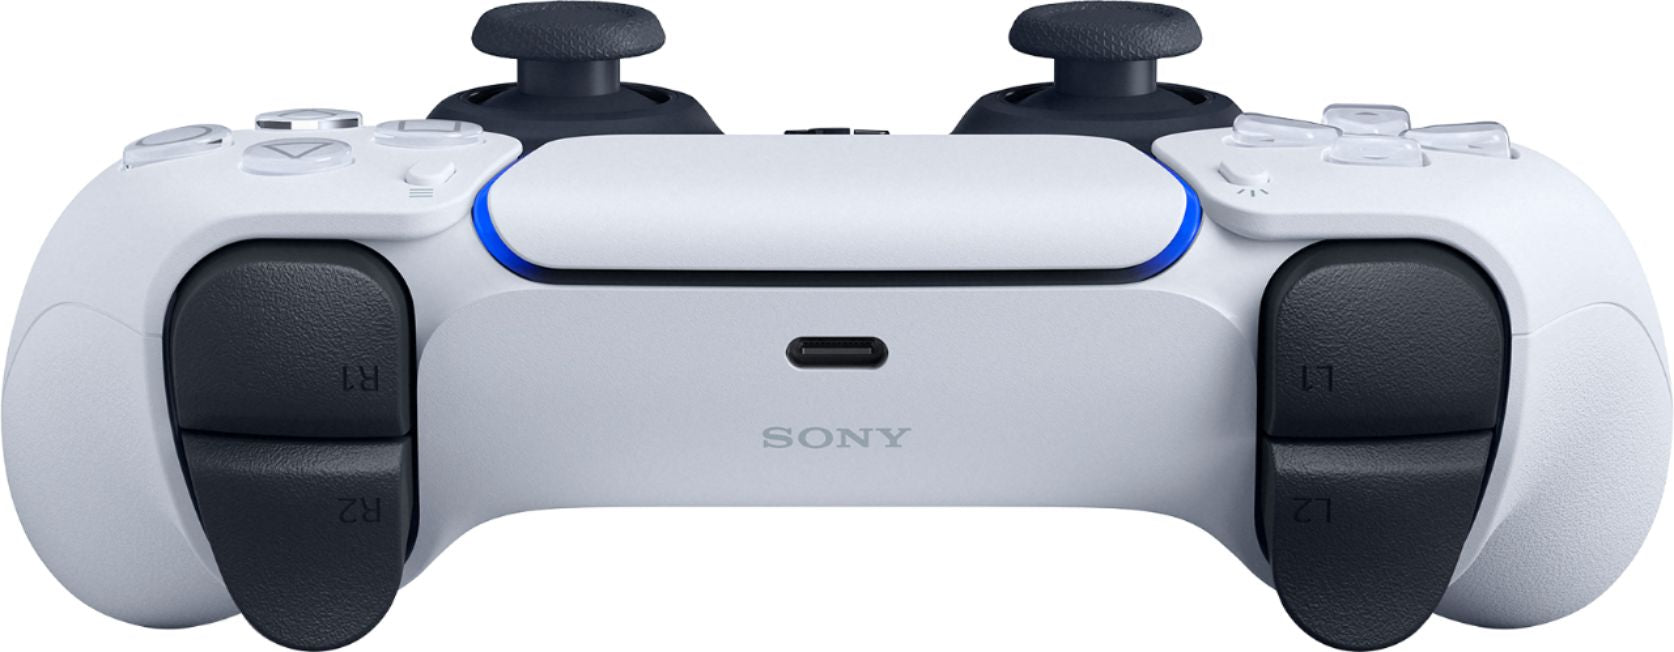 Sony Playstation 5 Digital Edition with Extra DualSense Wireless Controller - Pro-Distributing